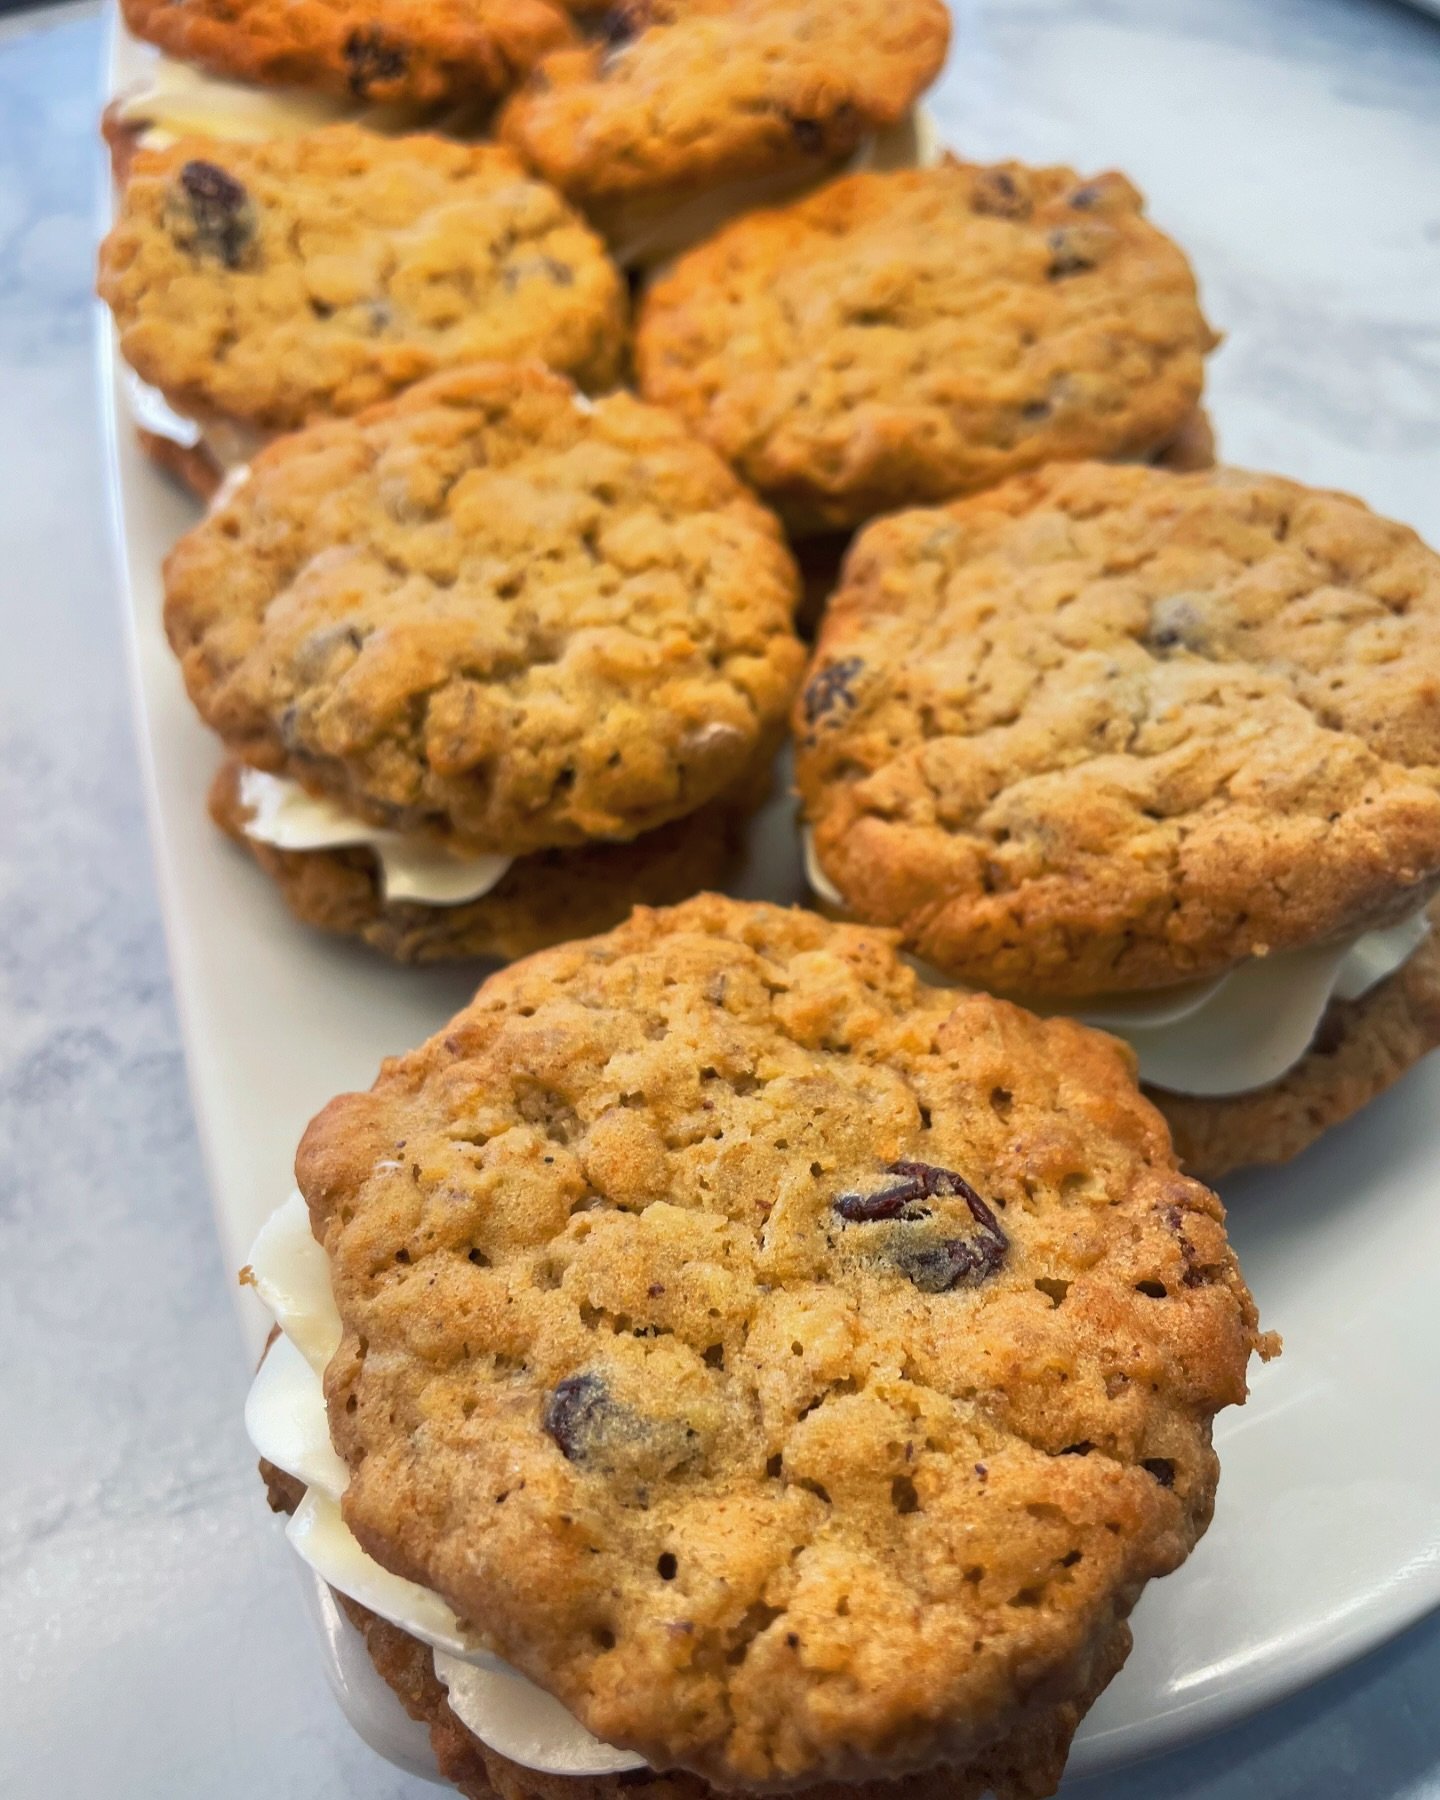 We&rsquo;ve got a special item in the case right now&mdash;Oatmeal Cranberry Cookie Sandwiches🍪😋

Two soft, chewy cookies sandwiched with our decadent Swiss meringue buttercream🤤 They&rsquo;re irresistible 

Stop by the bakery and get your while s